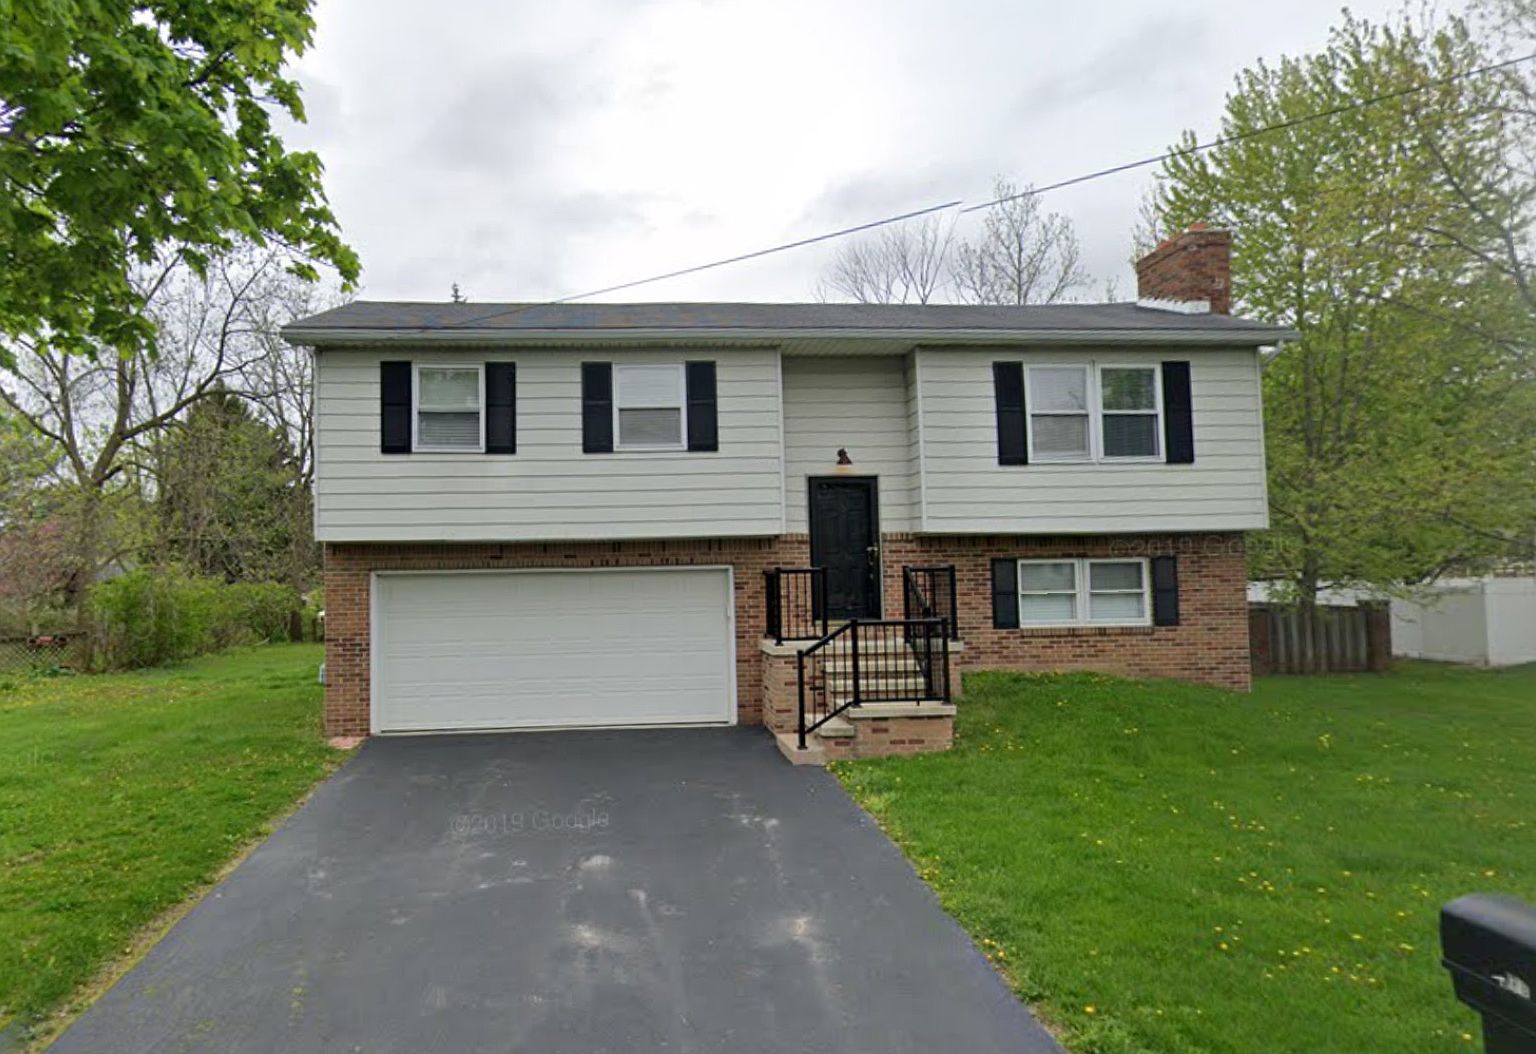 511 N Wintergarden Rd Bowling Green Oh 43402 Zillow